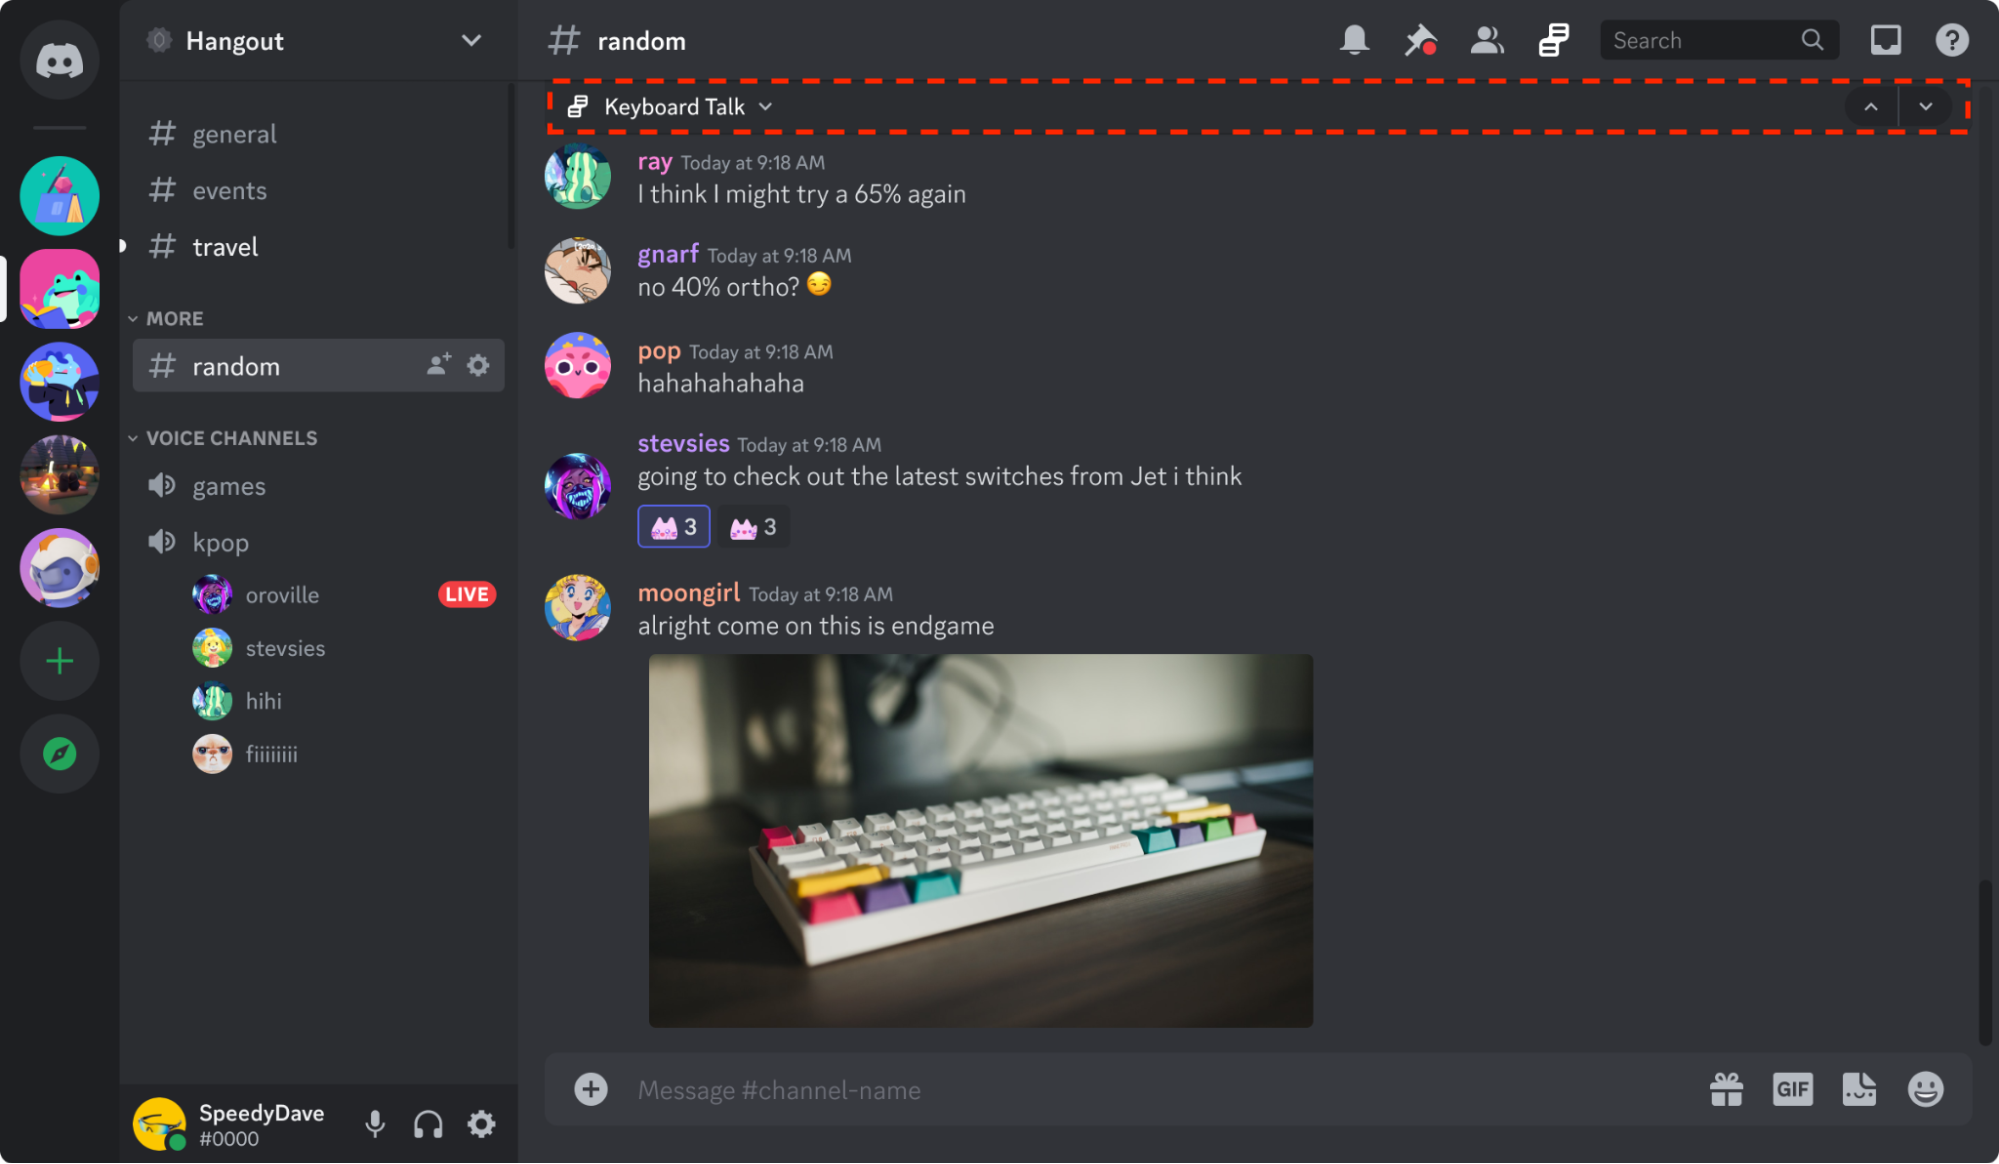 How To Hide Game Activity On Discord - PC Guide